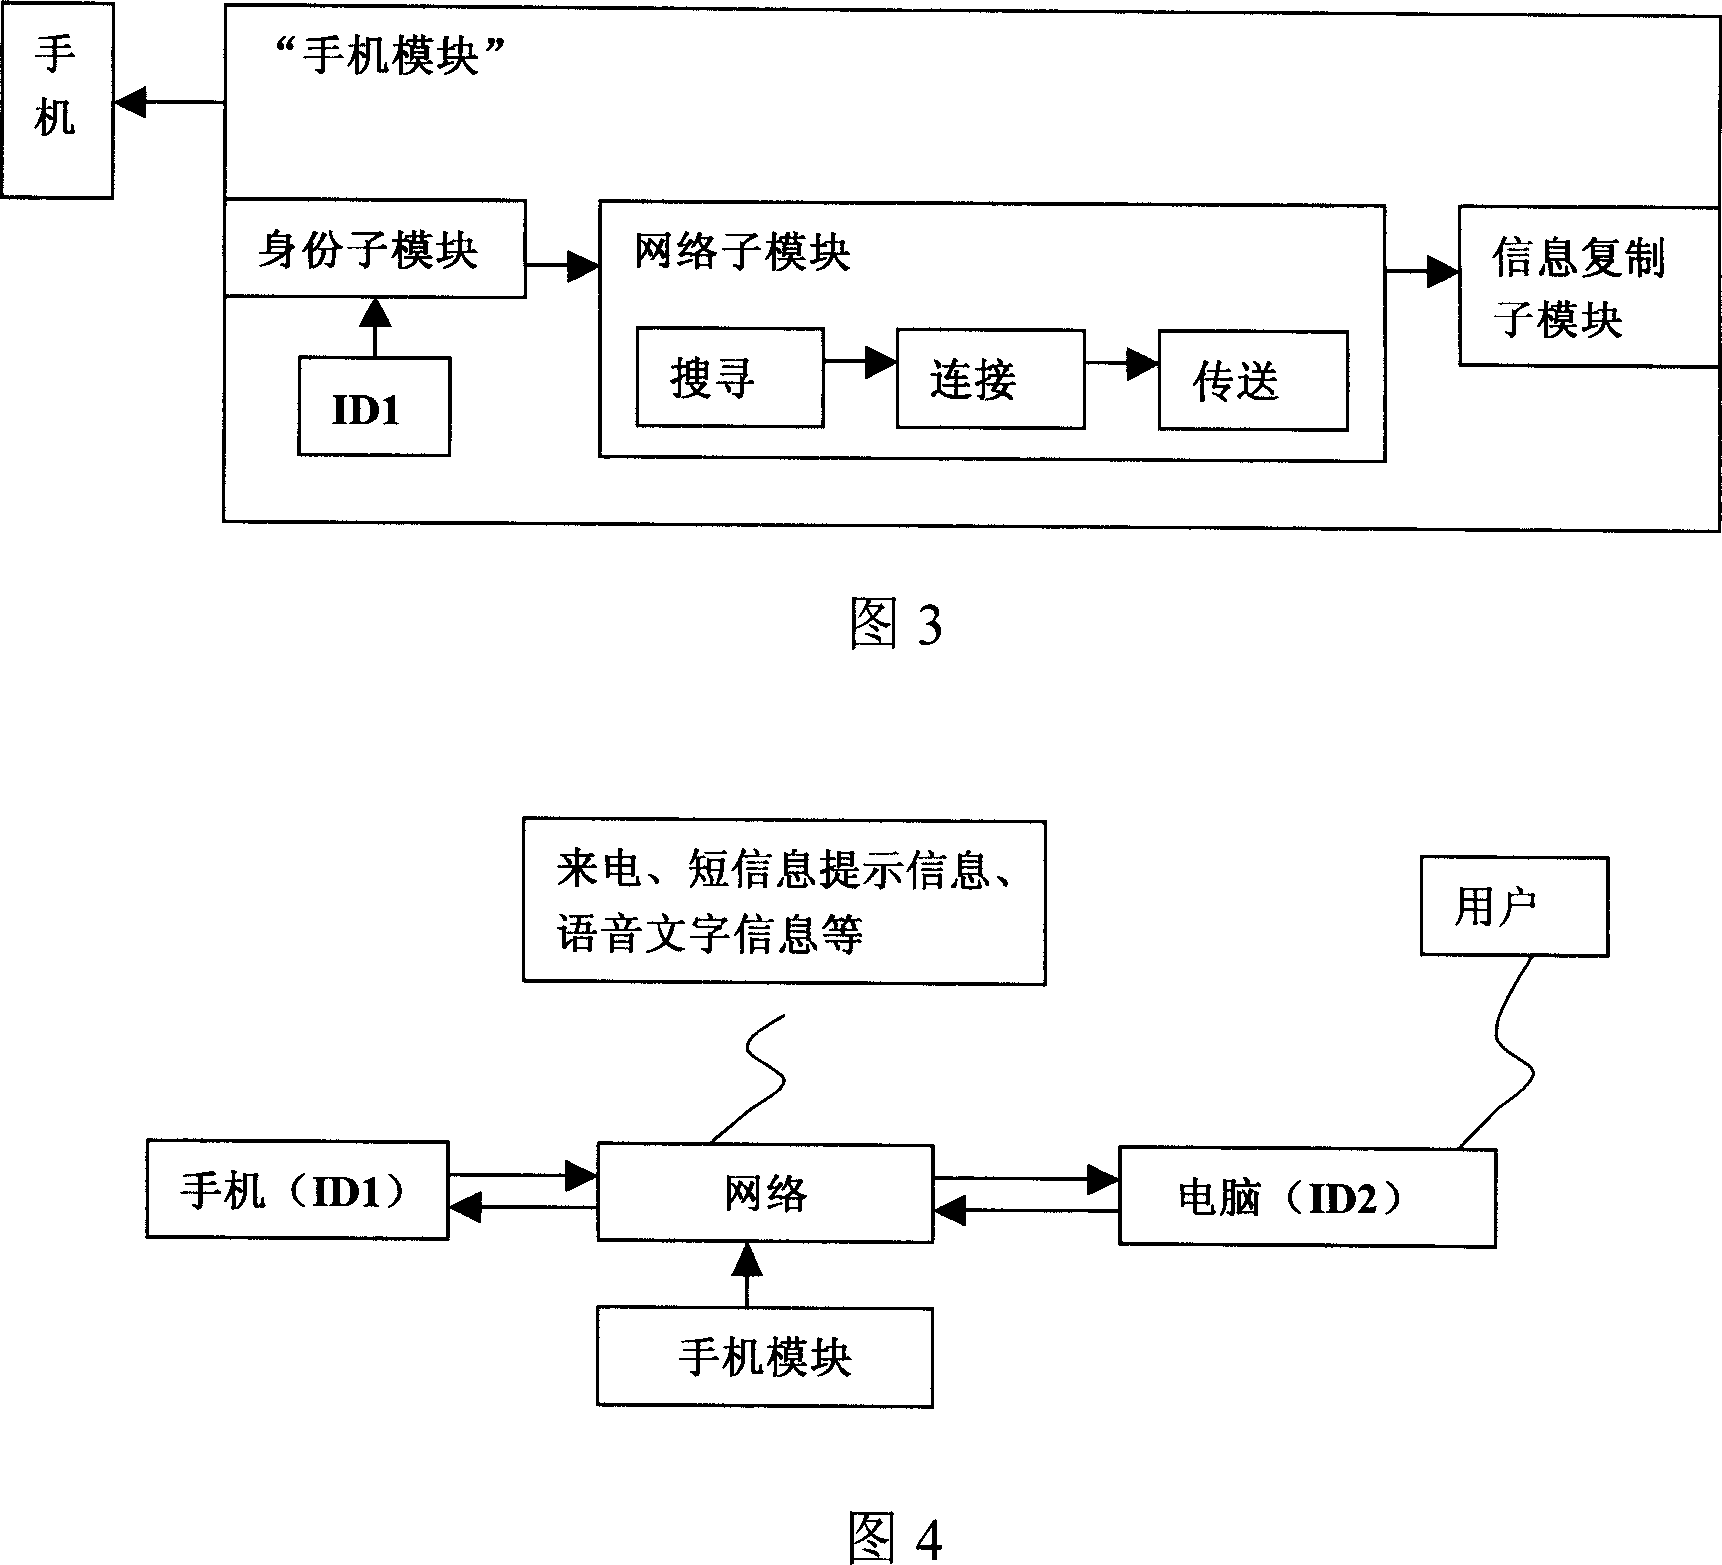 Device capable of simulating basic function of mobile phone in computer